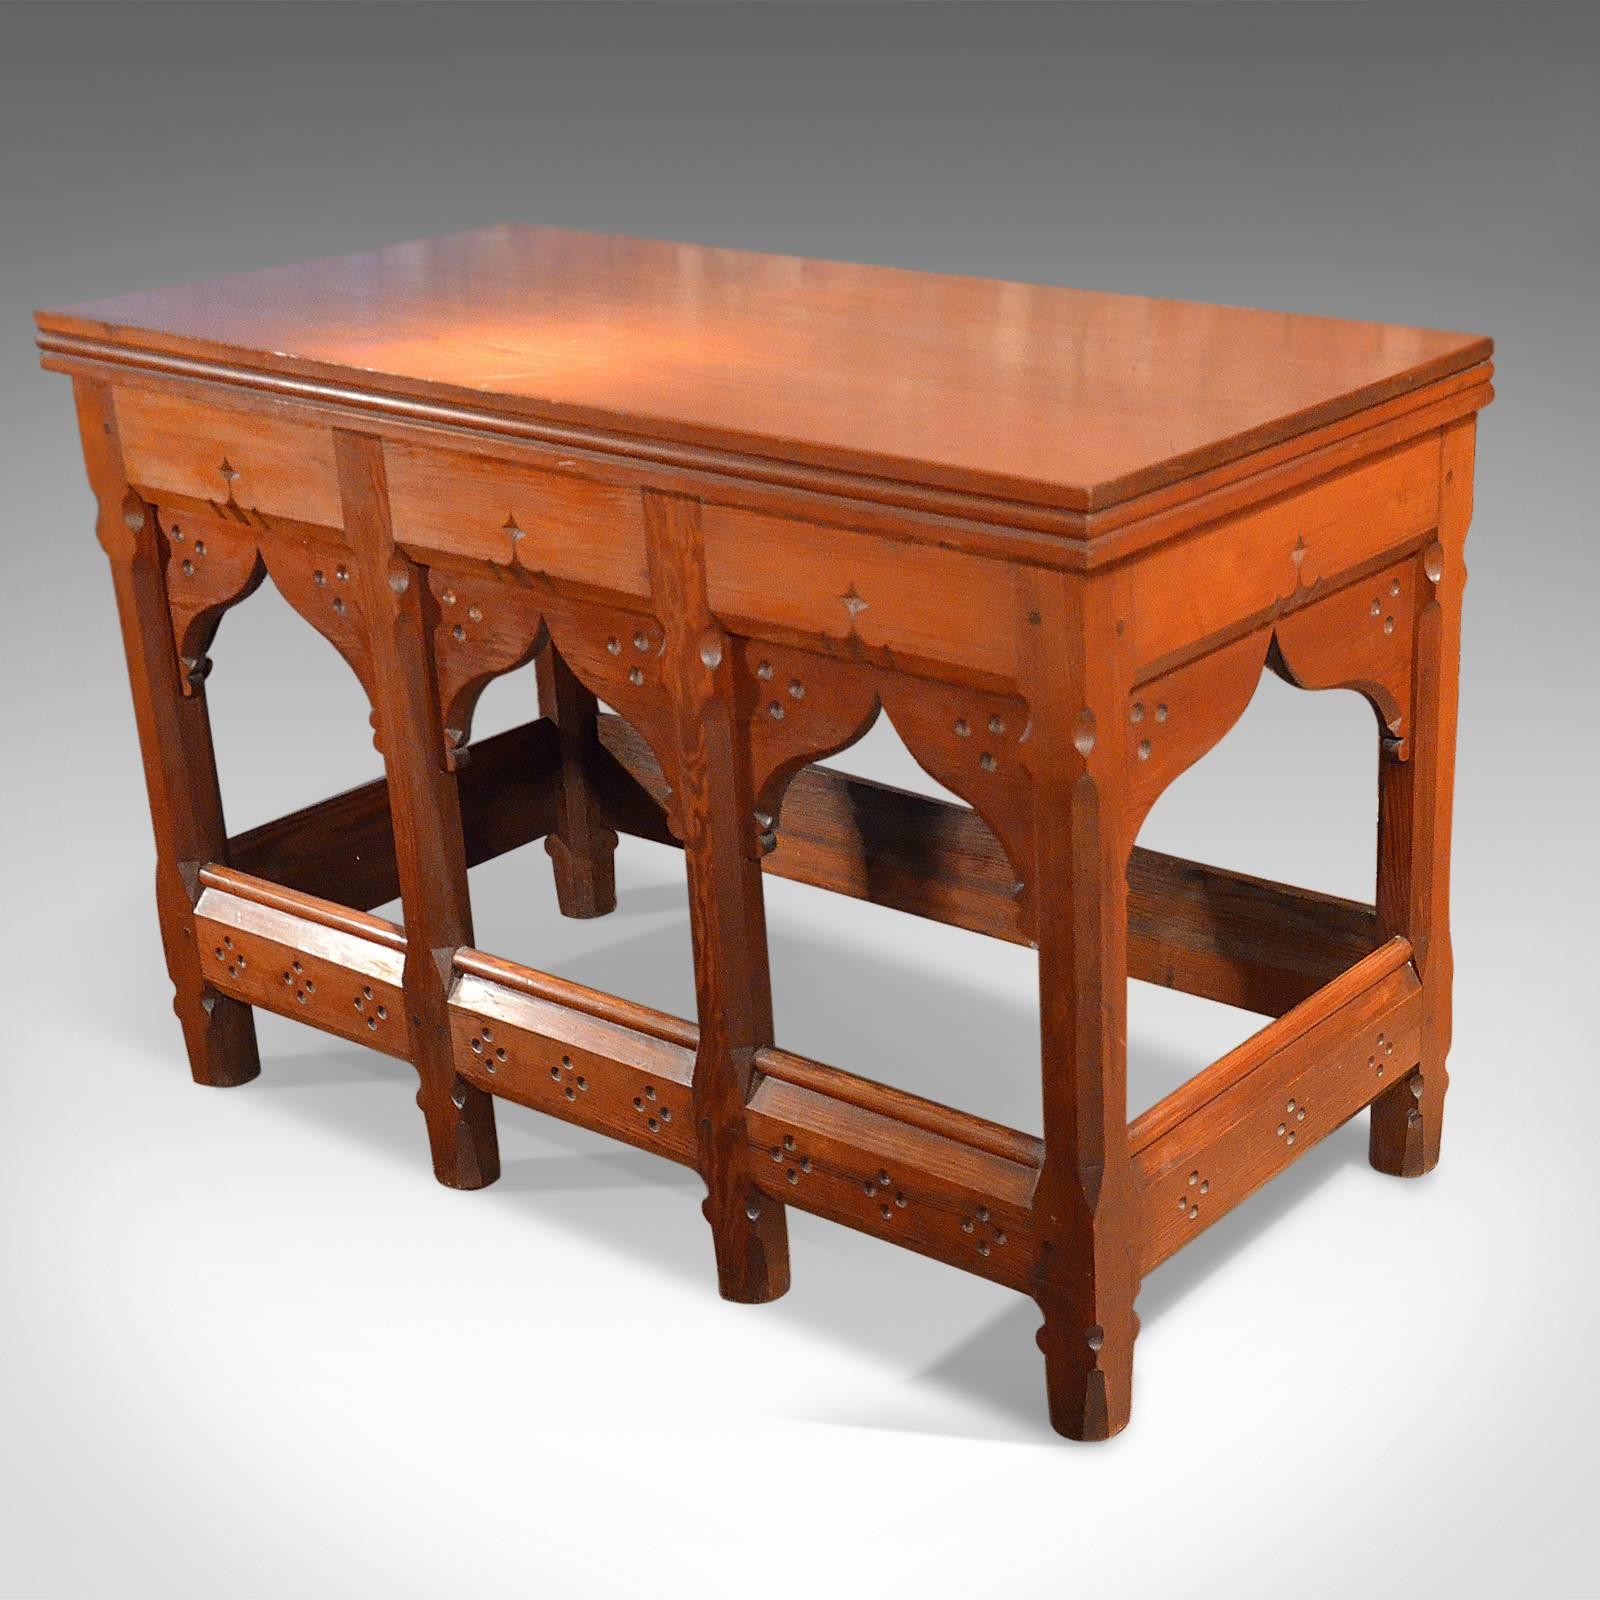 19th Century Arts and Crafts Antique Serving Table, circa 1880